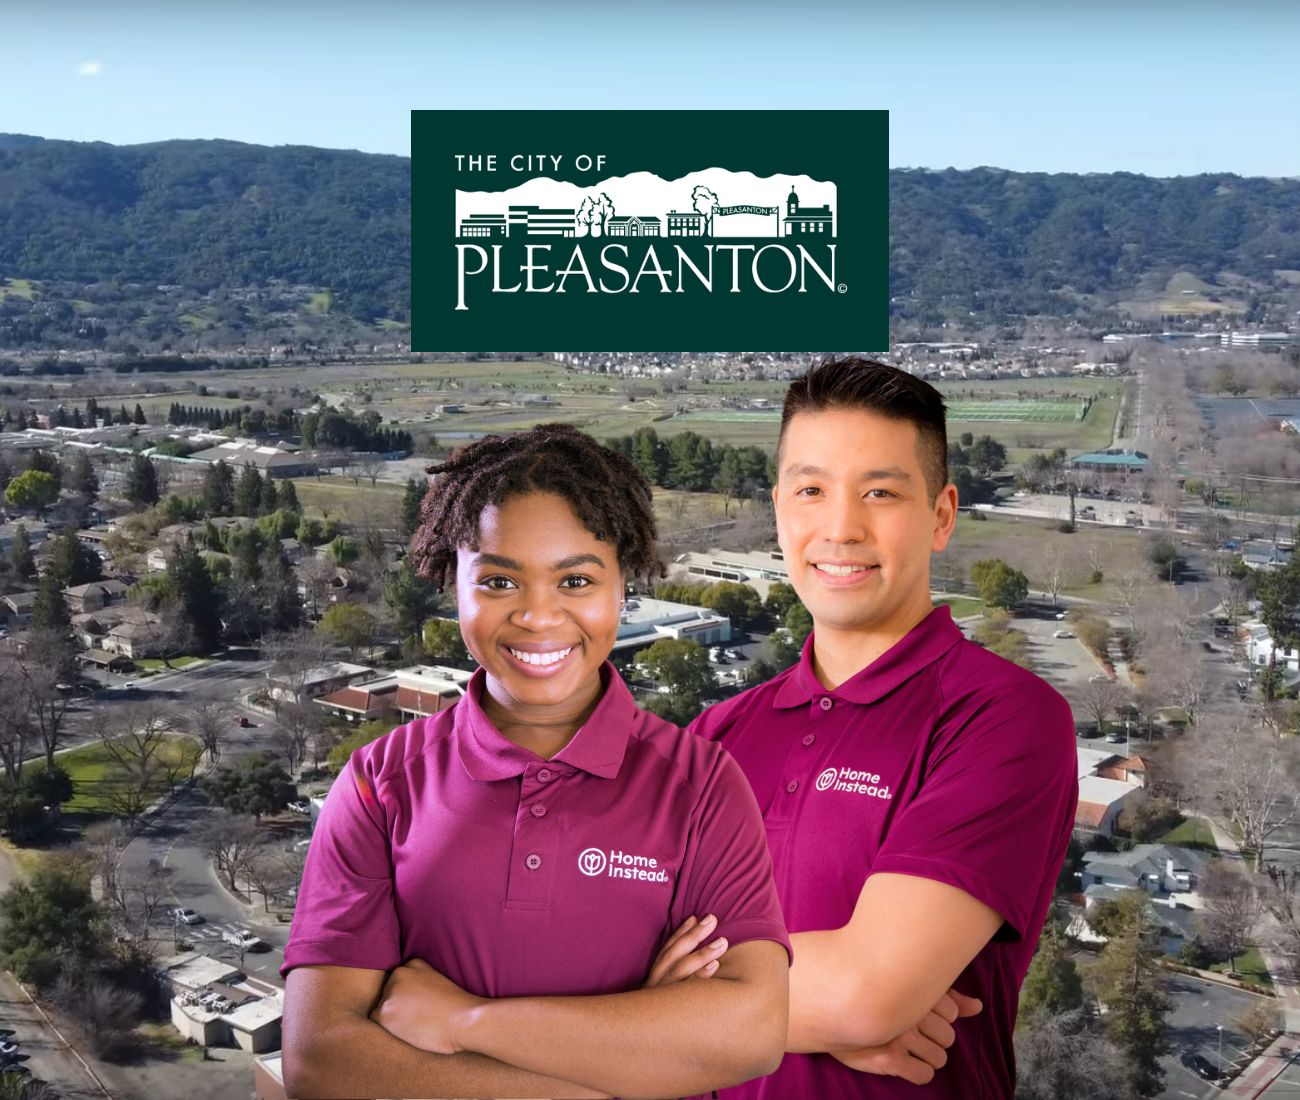 Home Instead caregivers with Pleasanton, California in the background